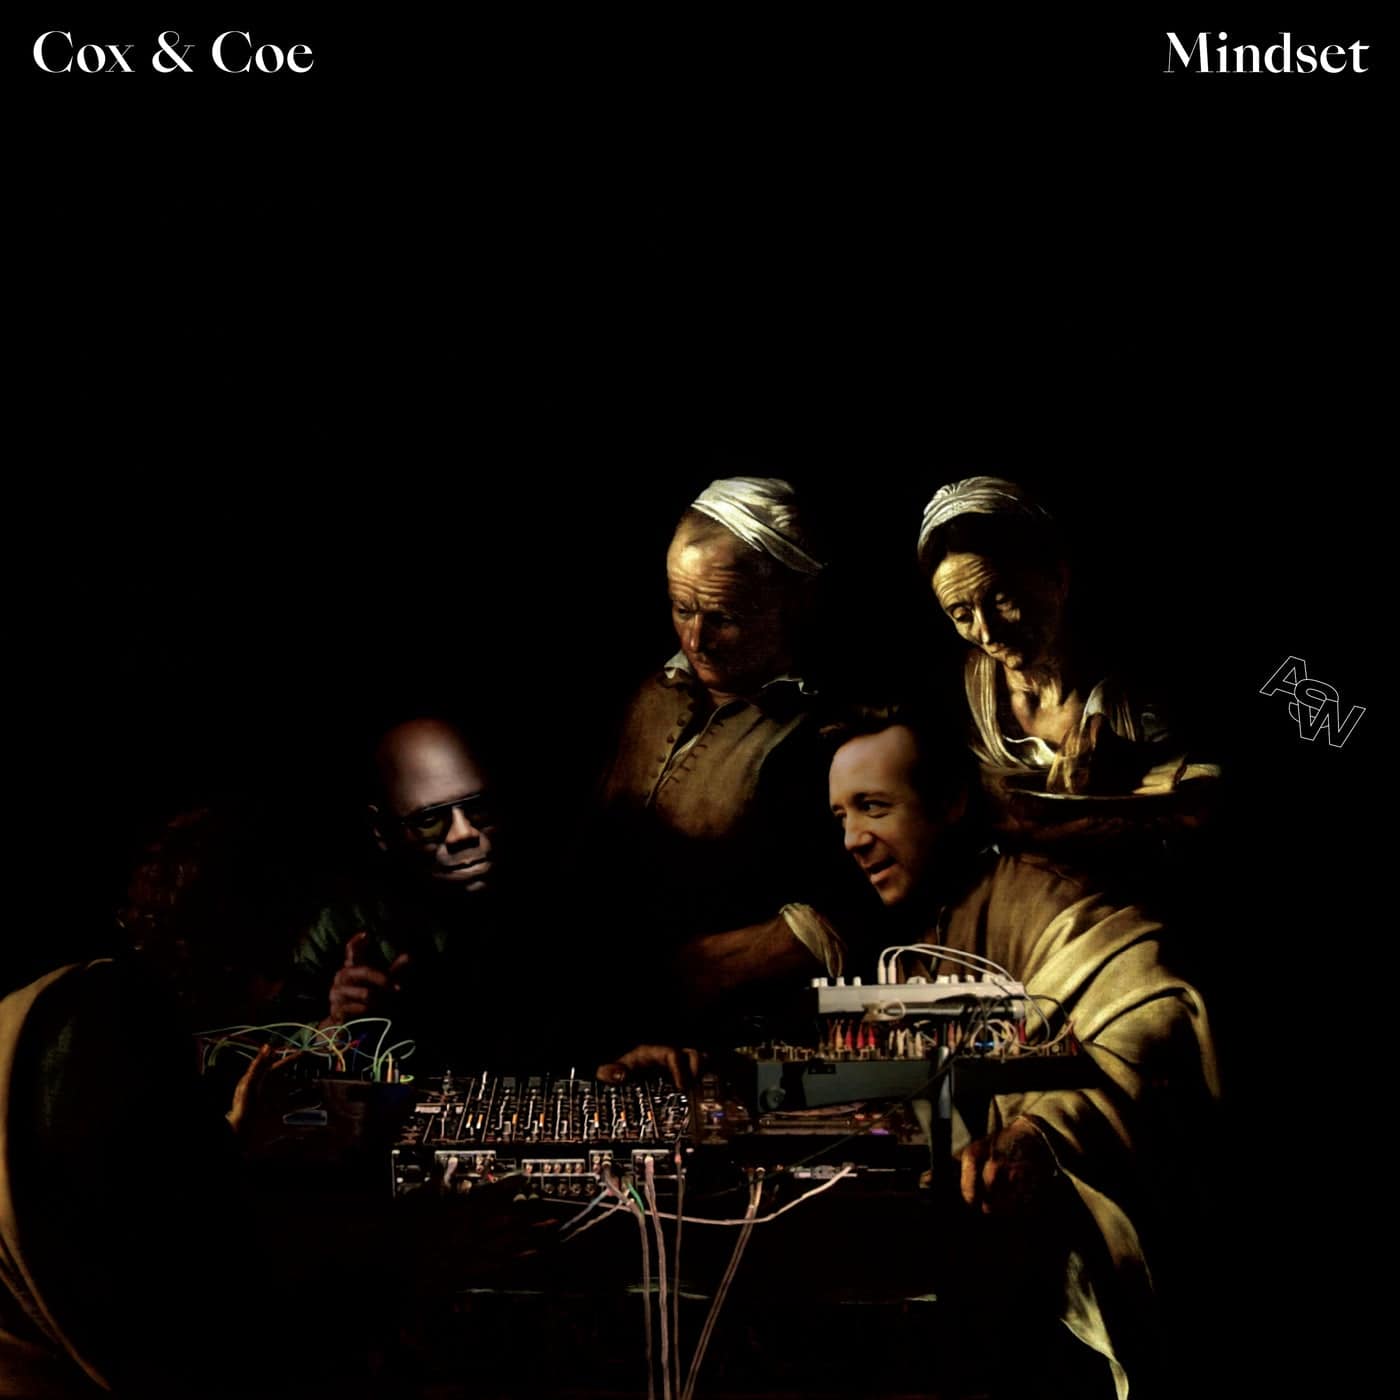 image cover: Carl Cox, Christopher Coe, Cox and Coe - Mindset - EP / ASW030NEWSPO